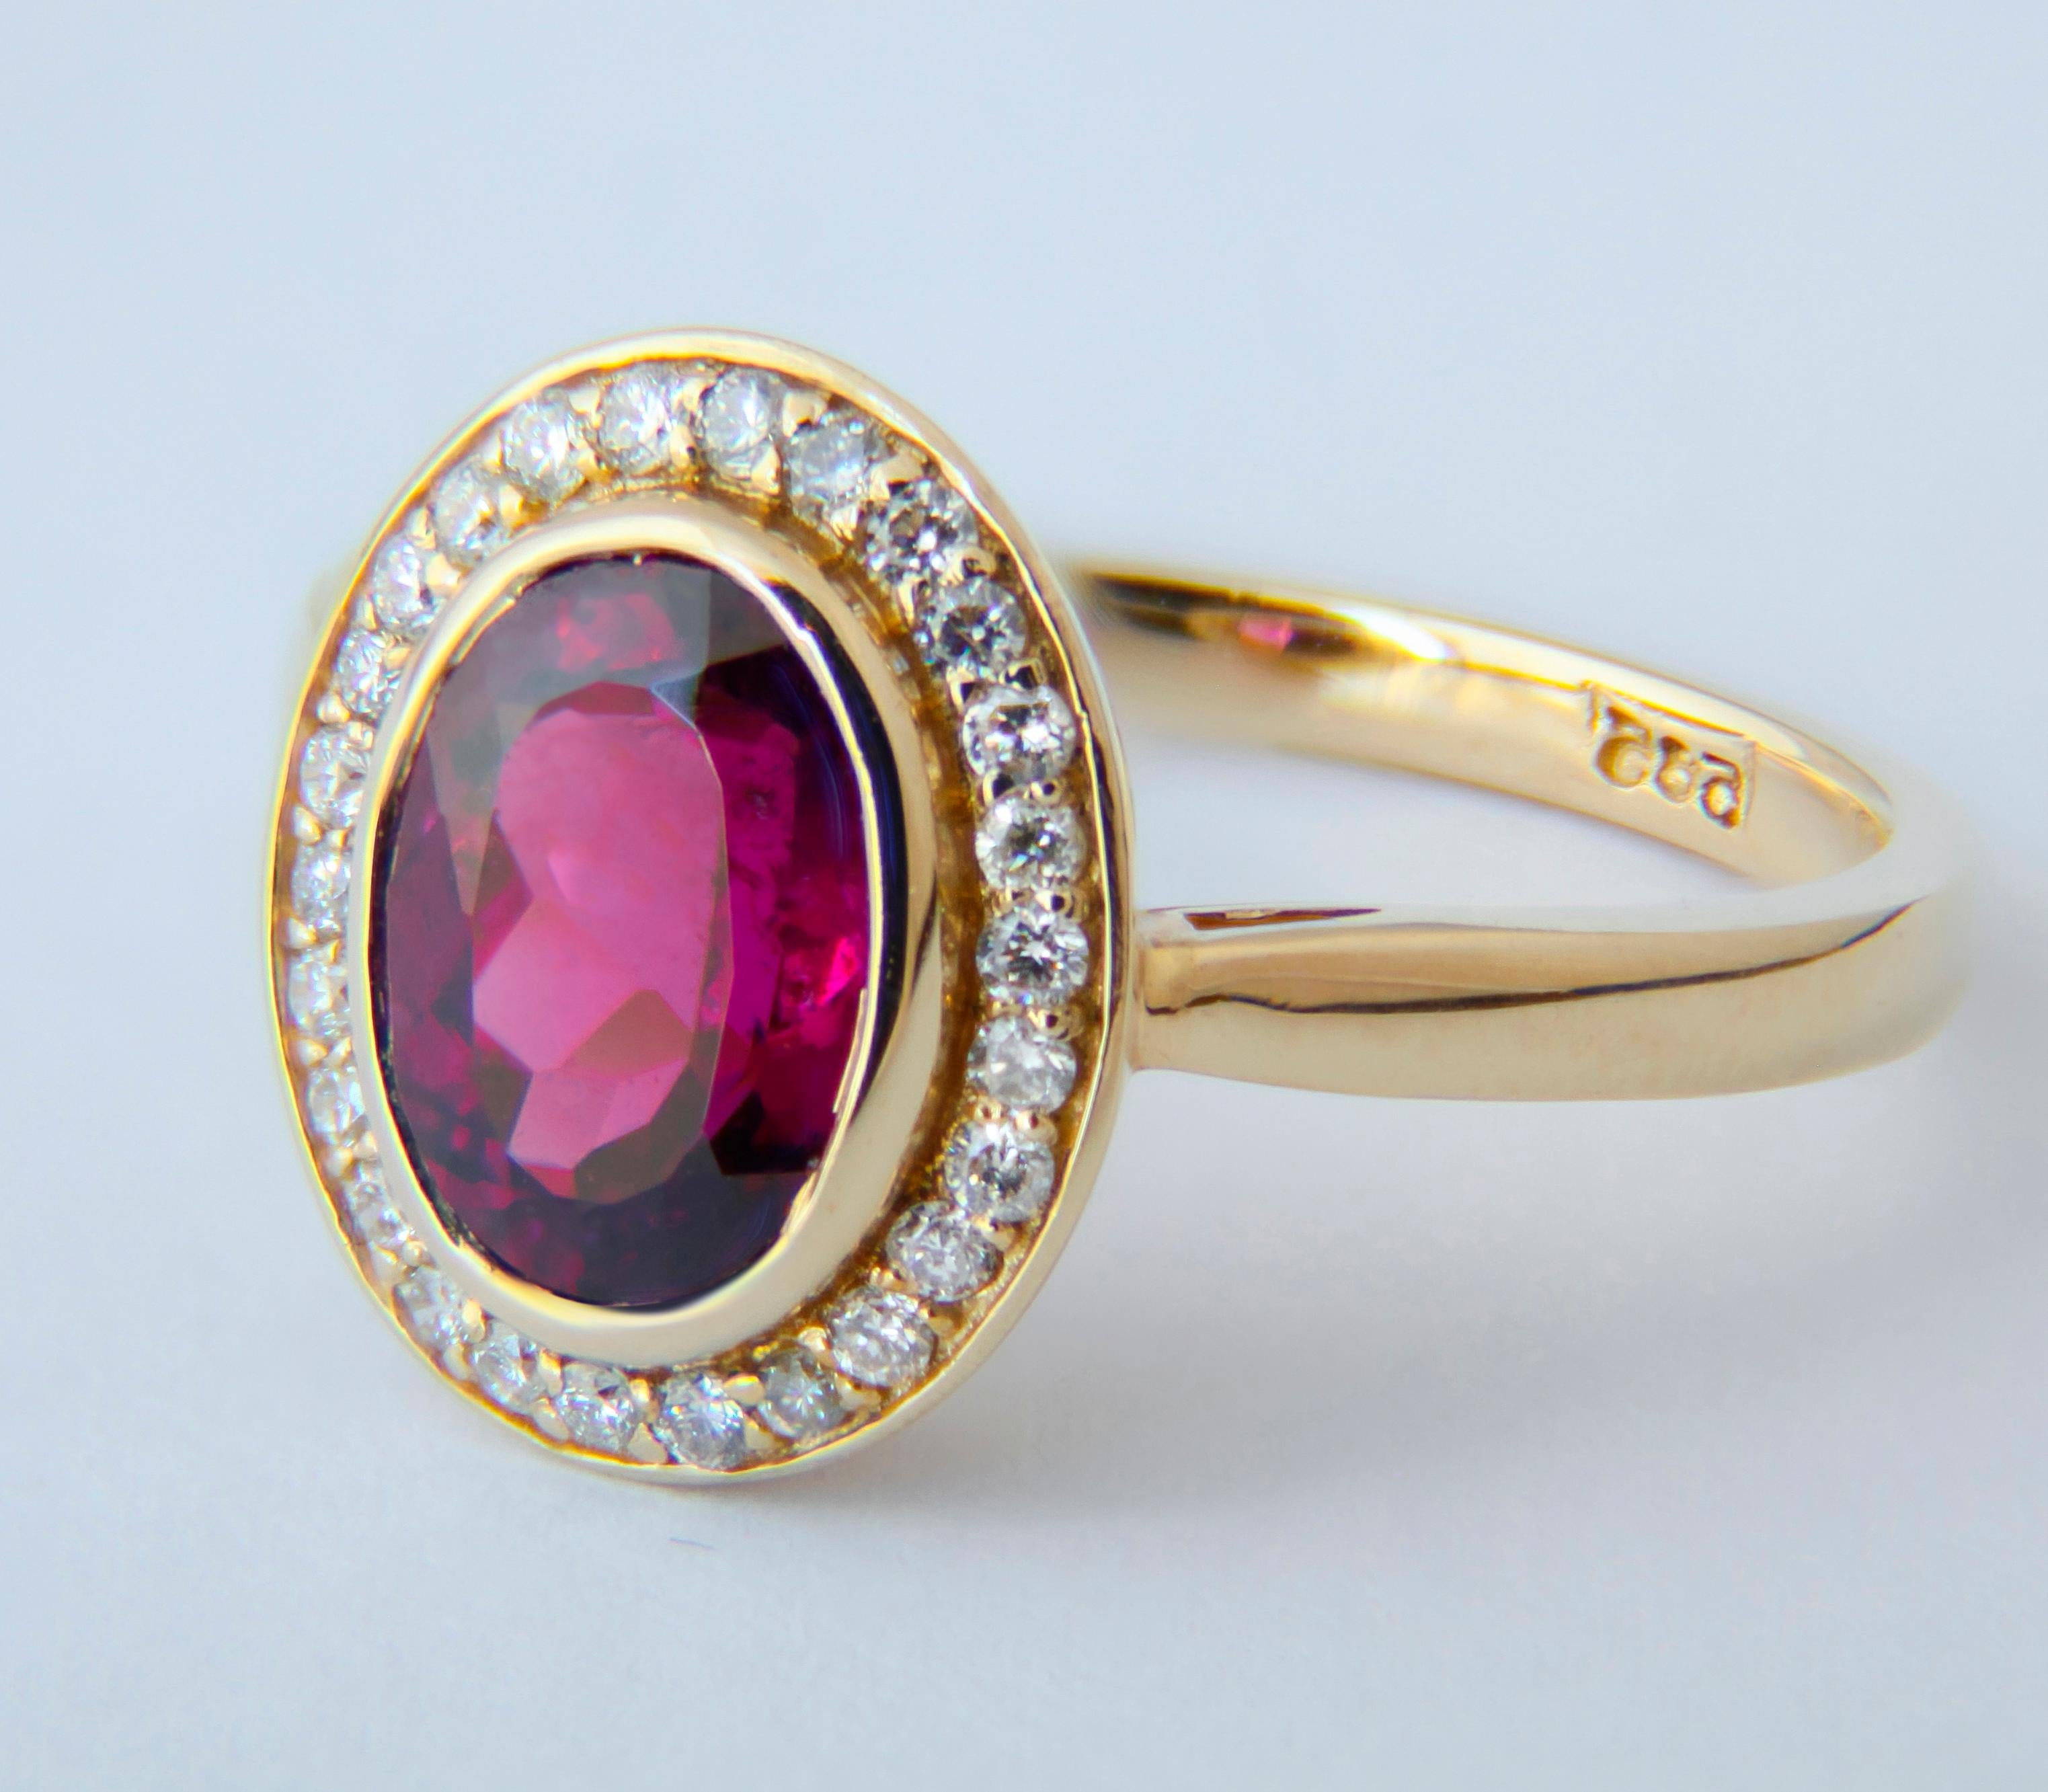 For Sale:  Garnet and diamonds 14k gold ring. 5